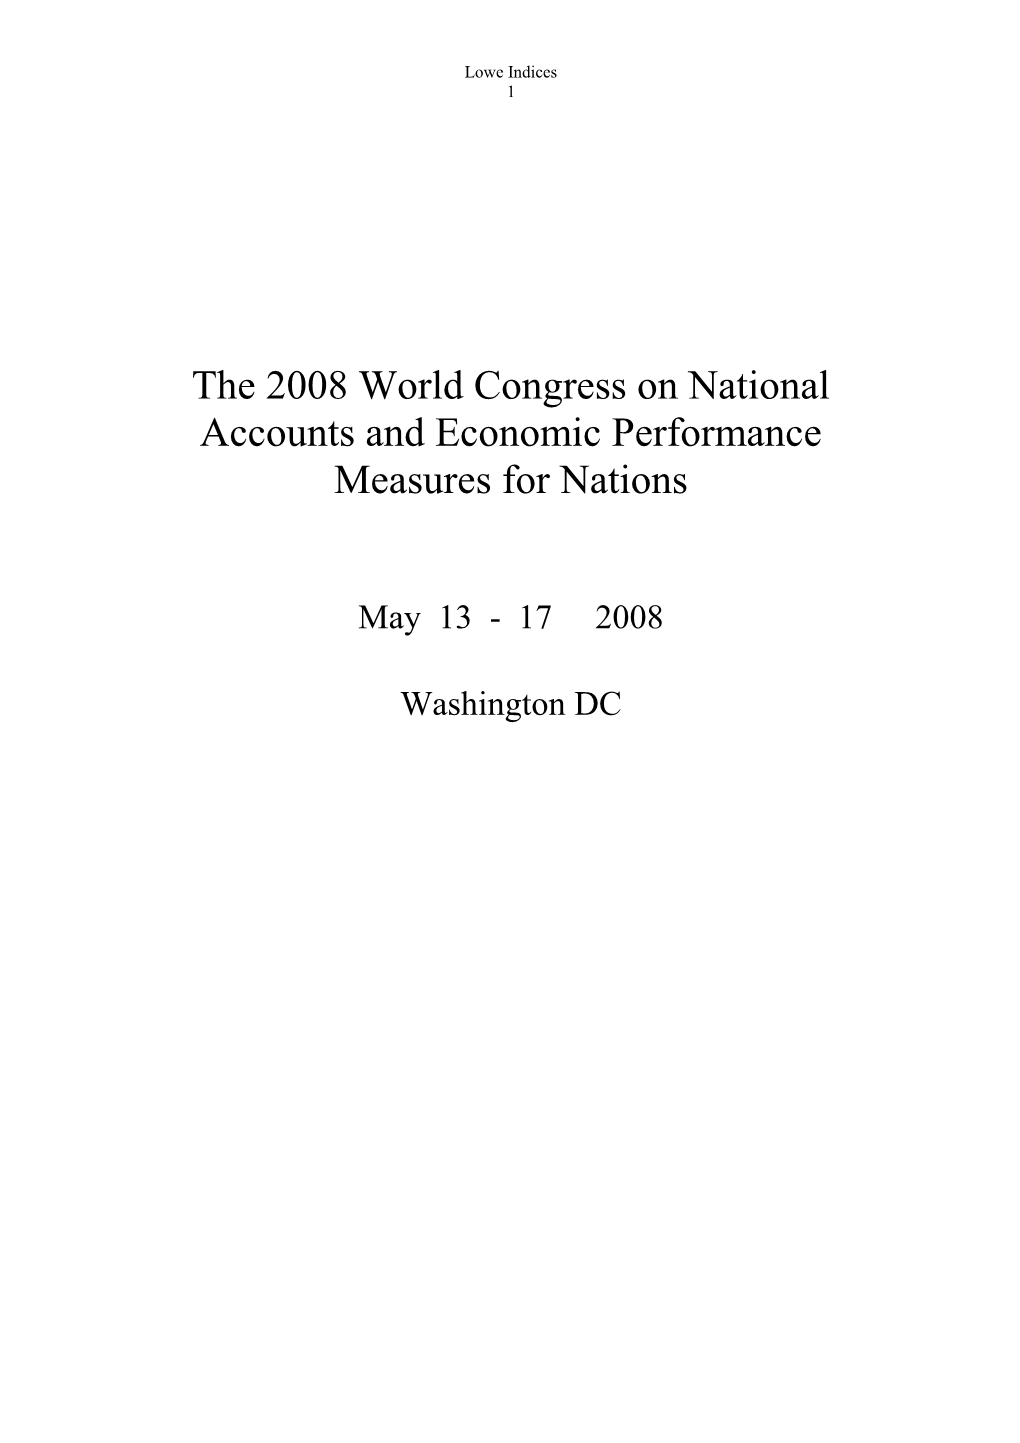 The 2008 World Congress on National Accounts and Economic Performance Measures for Nations